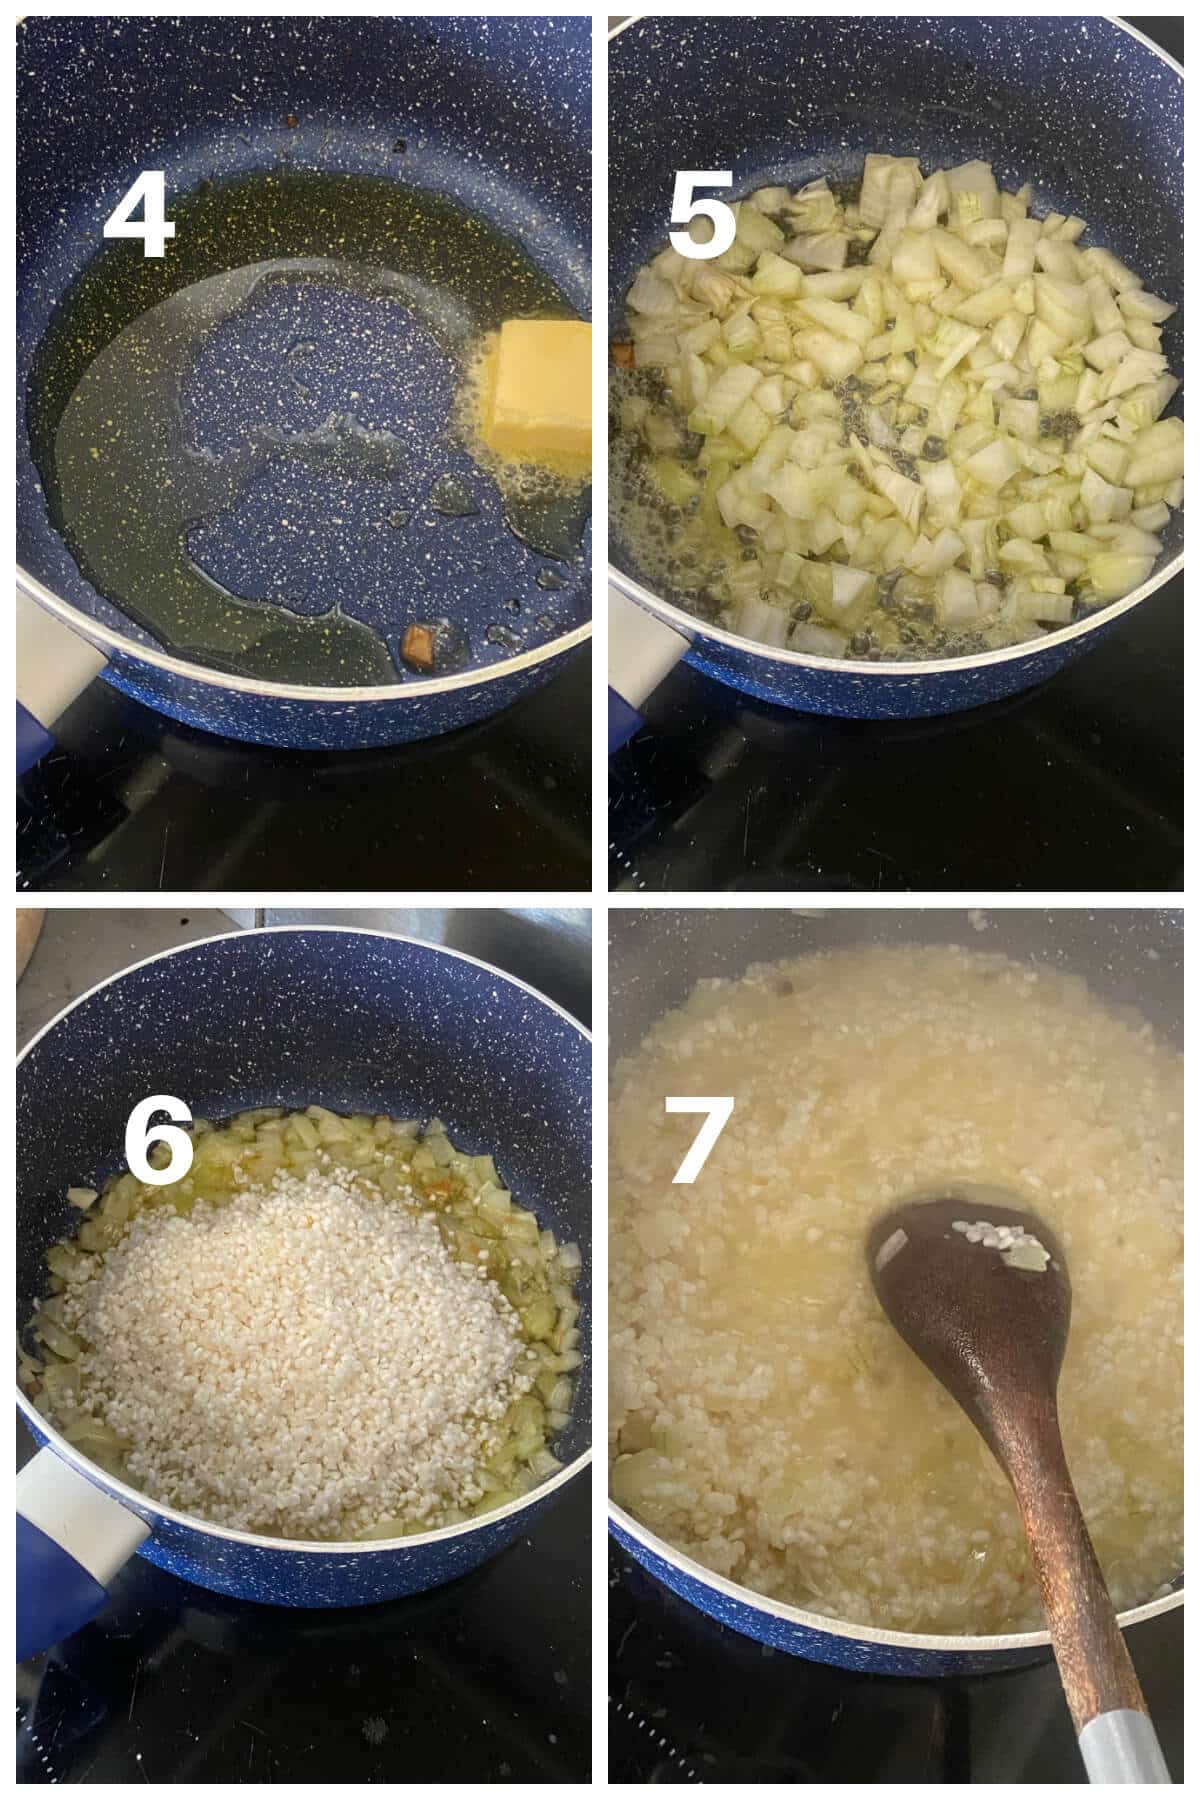 Collage of 4 photos to show how to make risotto.